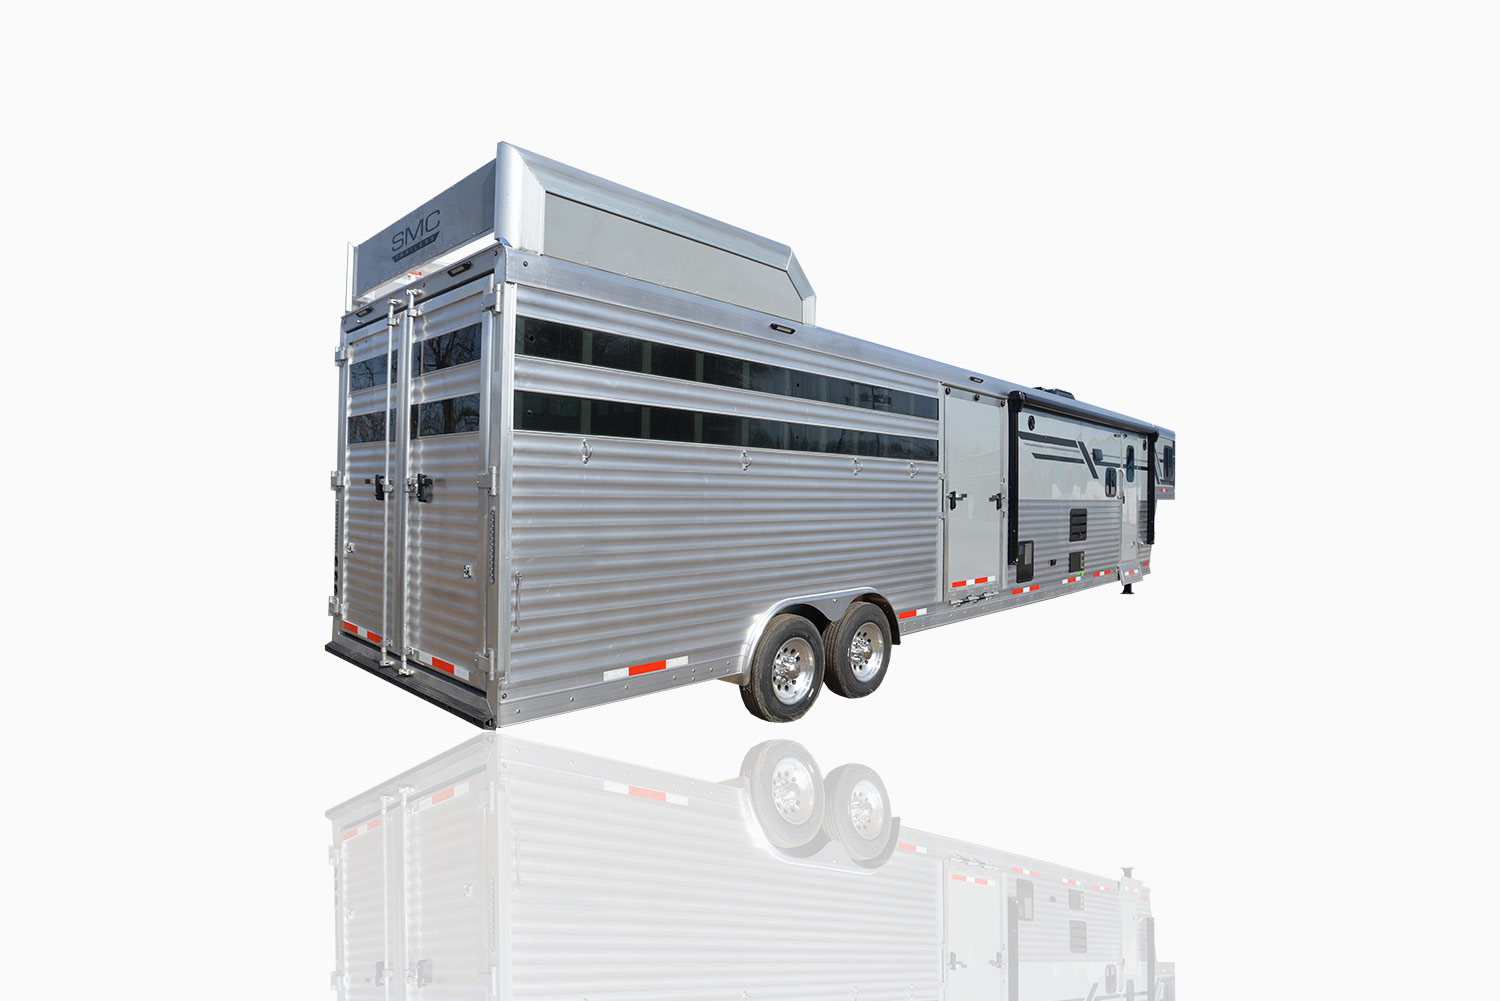 Horse Trailers In Stock